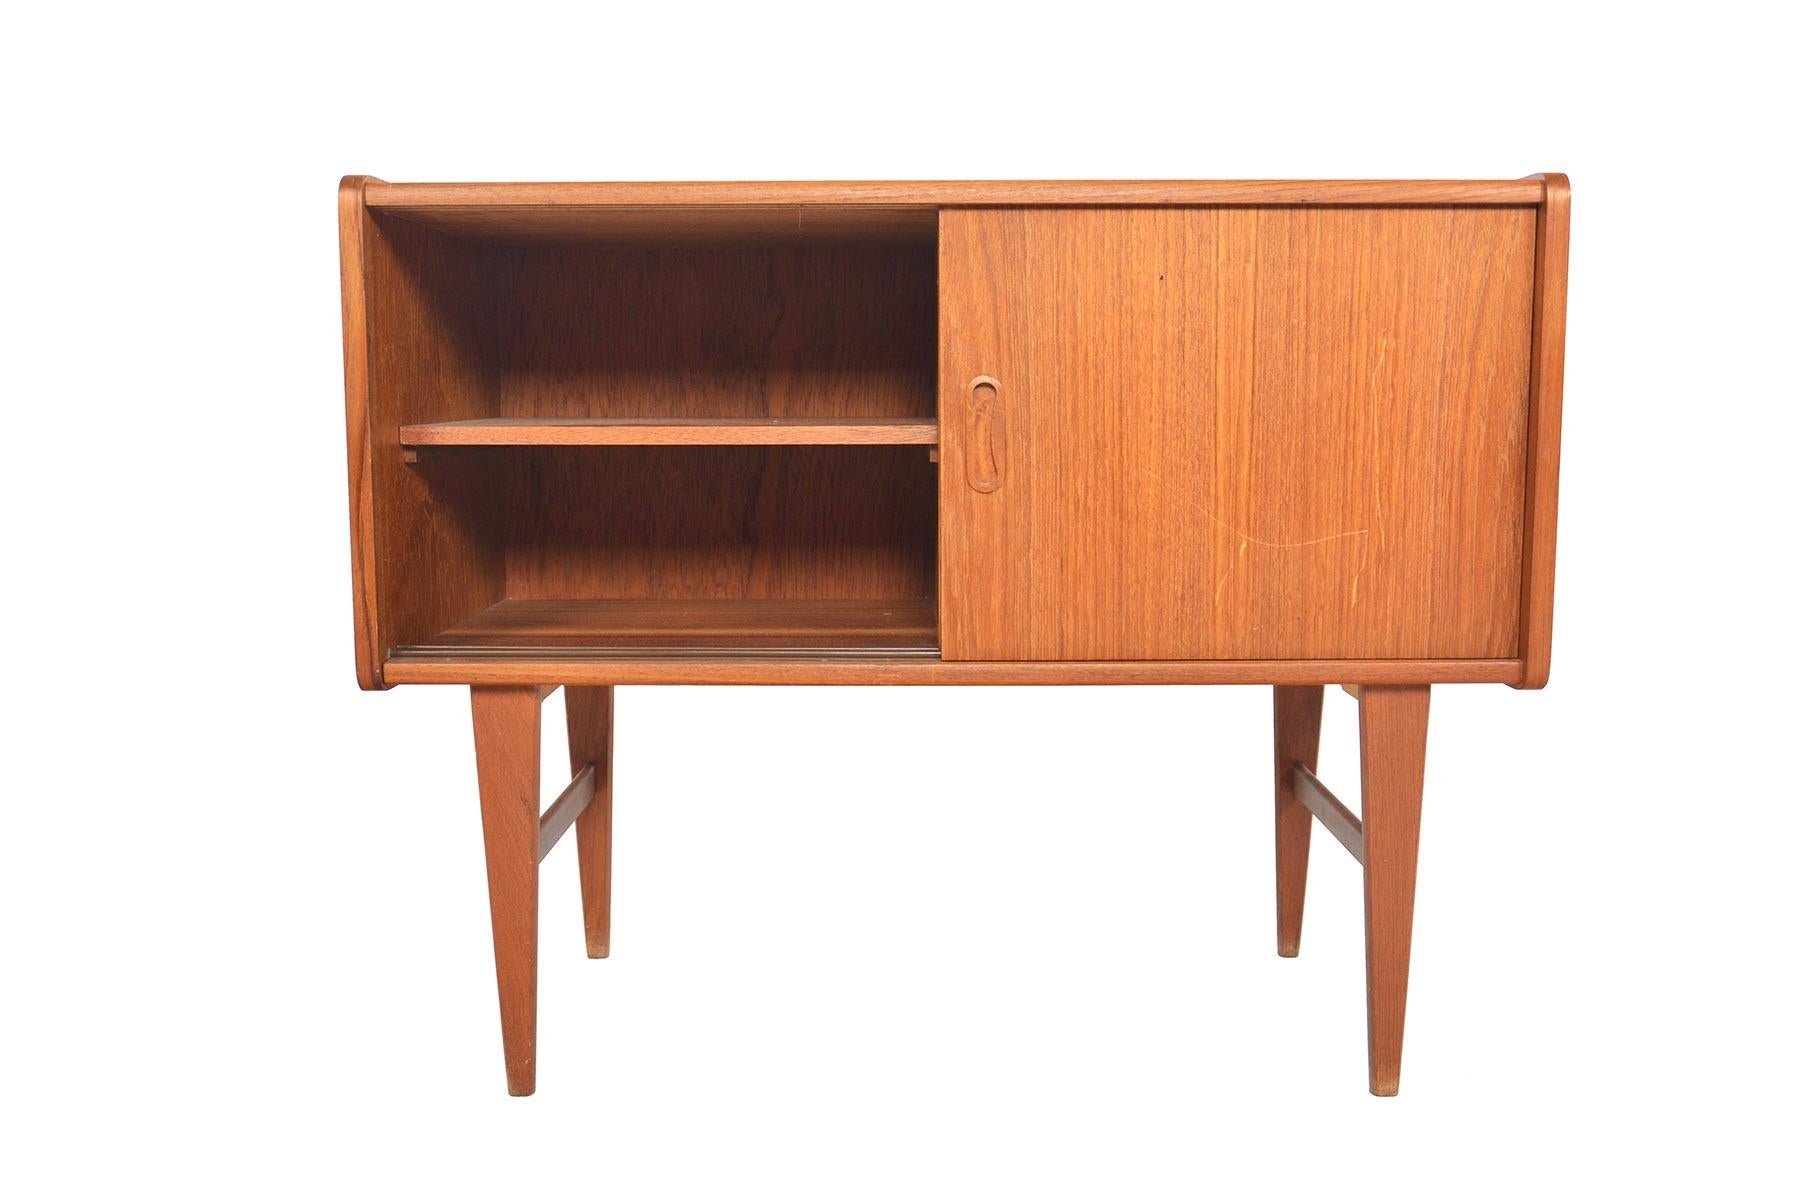 Origin: Denmark
Designer: Unknown
Manufacturer: Unknown
Era: 1960s
Dimensions: 31.5 wide x 14.5 deep x 25.5 tall
Interior cabinets (each): 15 wide x 12 deep x 12 tall

Restoration Includes:
• Structural + joint repair (if necessary) on all